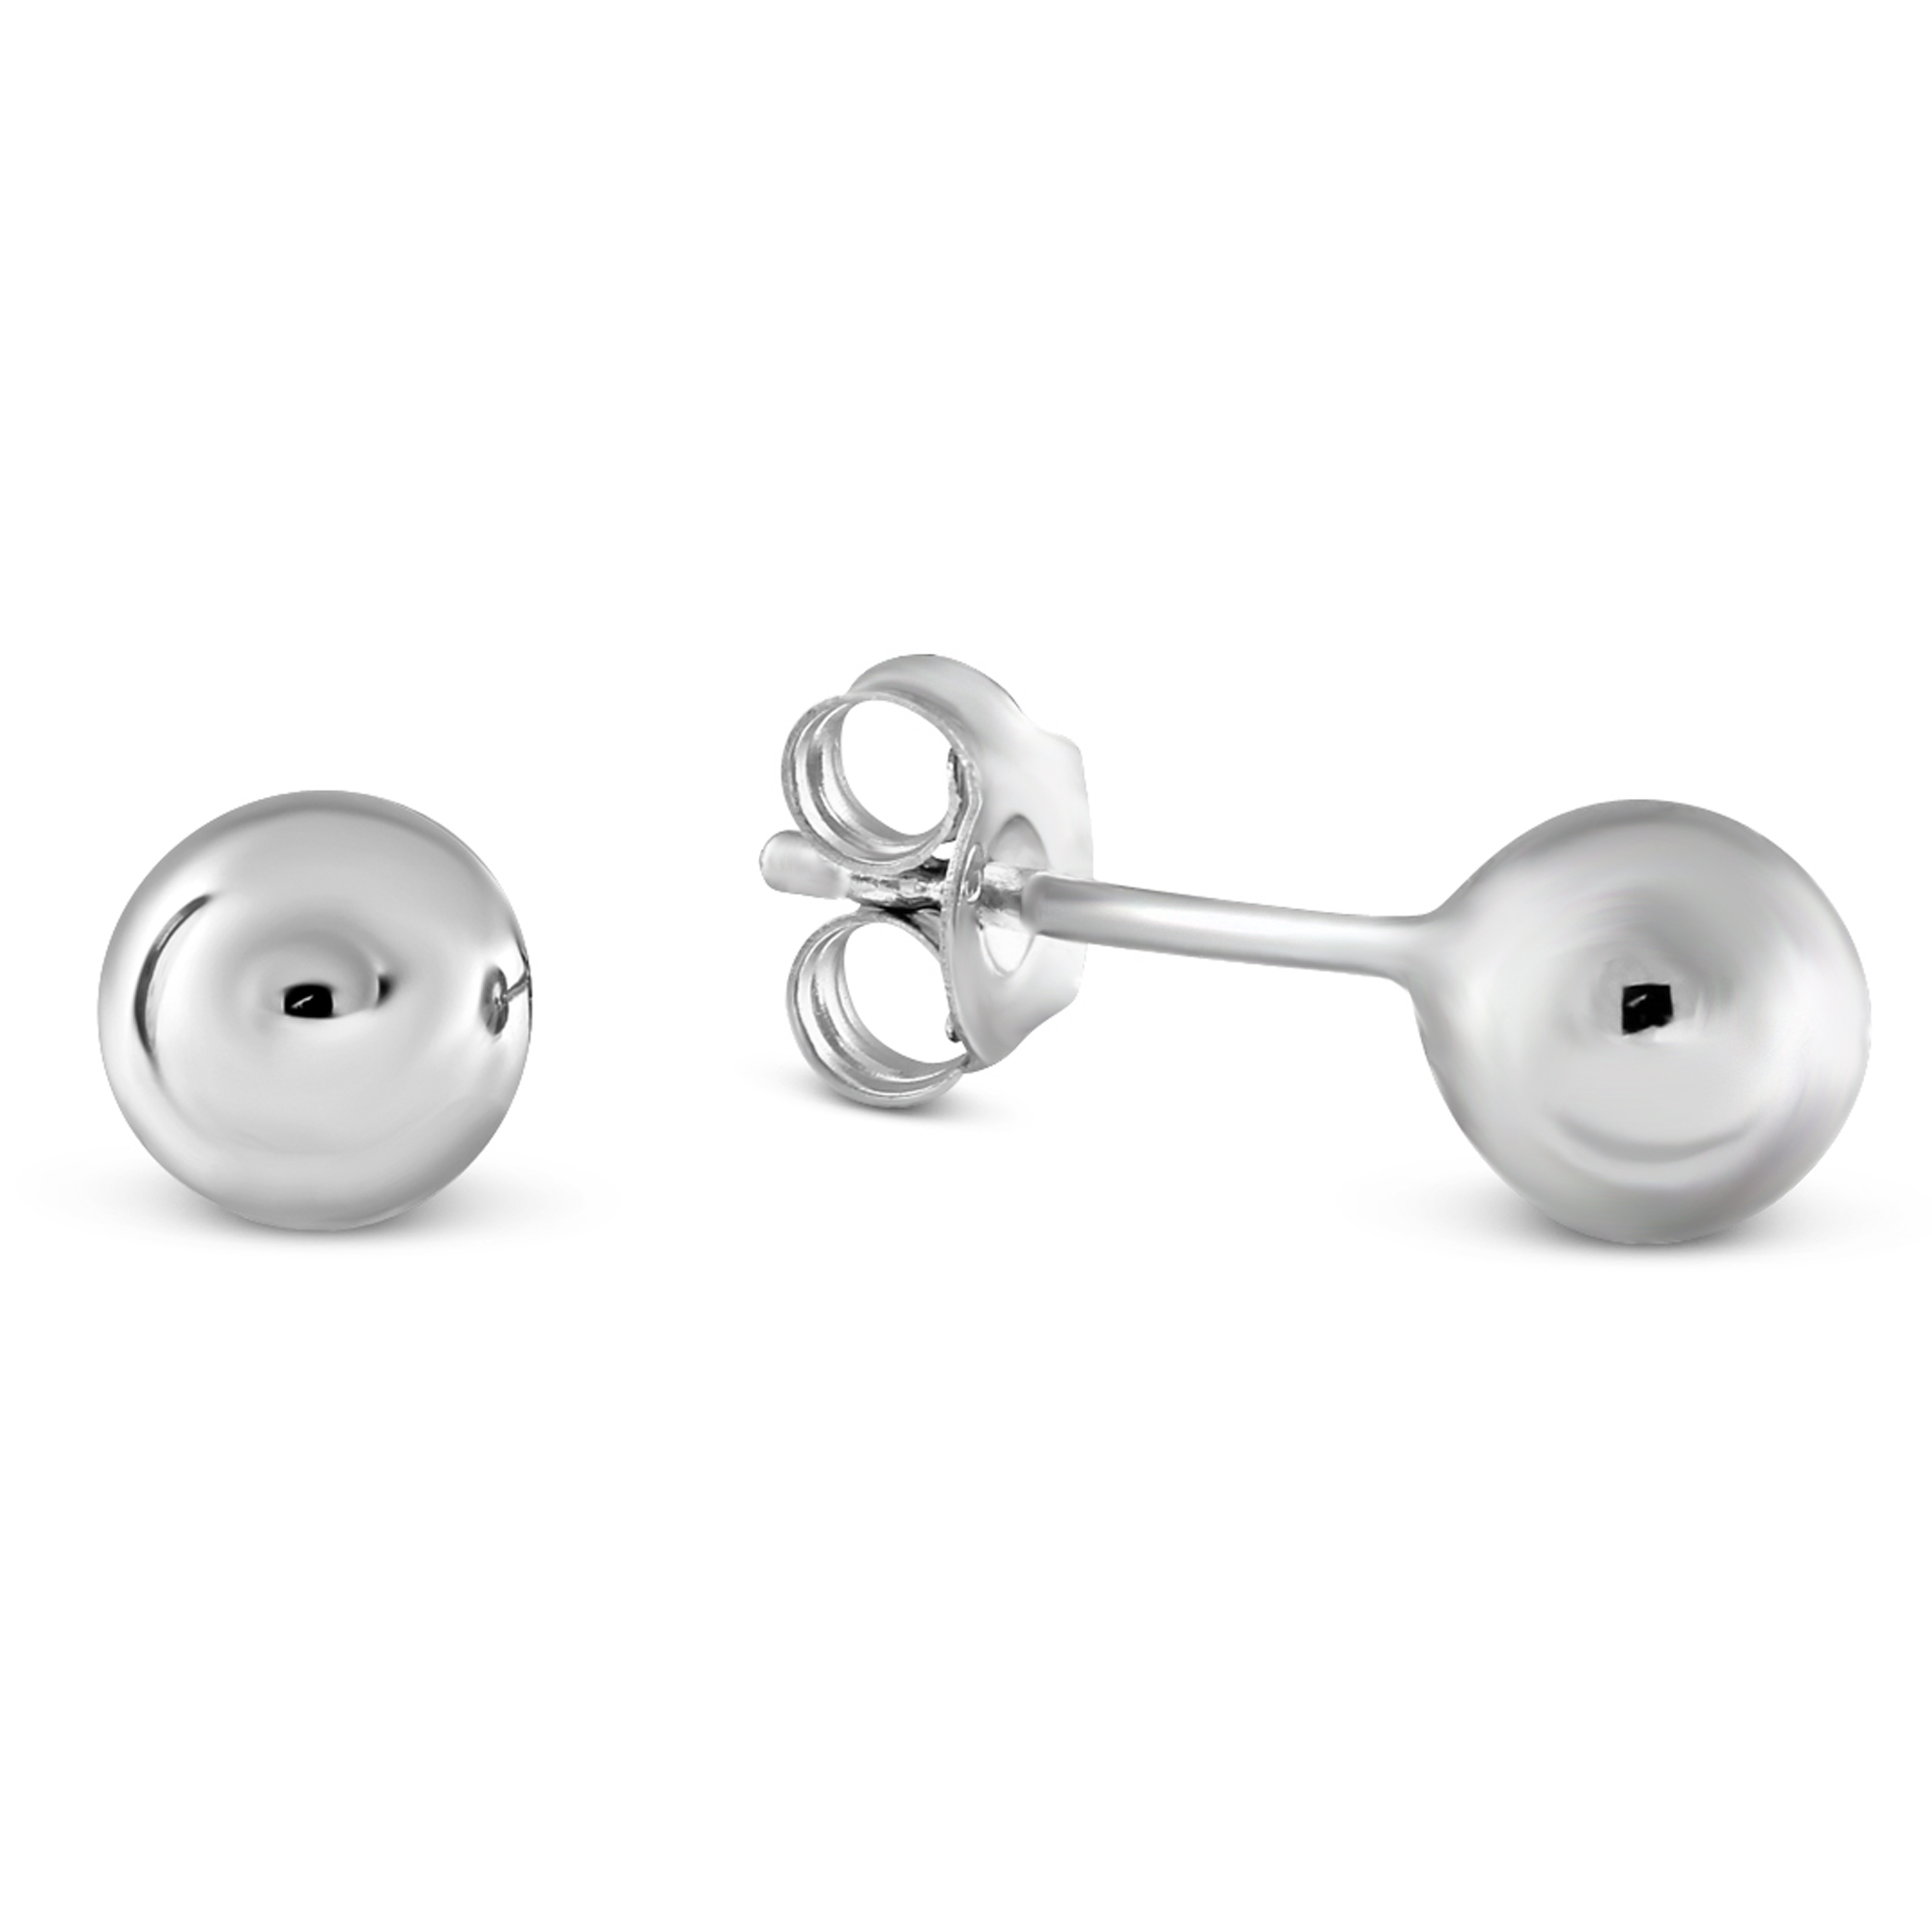 Sterling Silver Solid Ball Earrings, 6mm | Borsheims